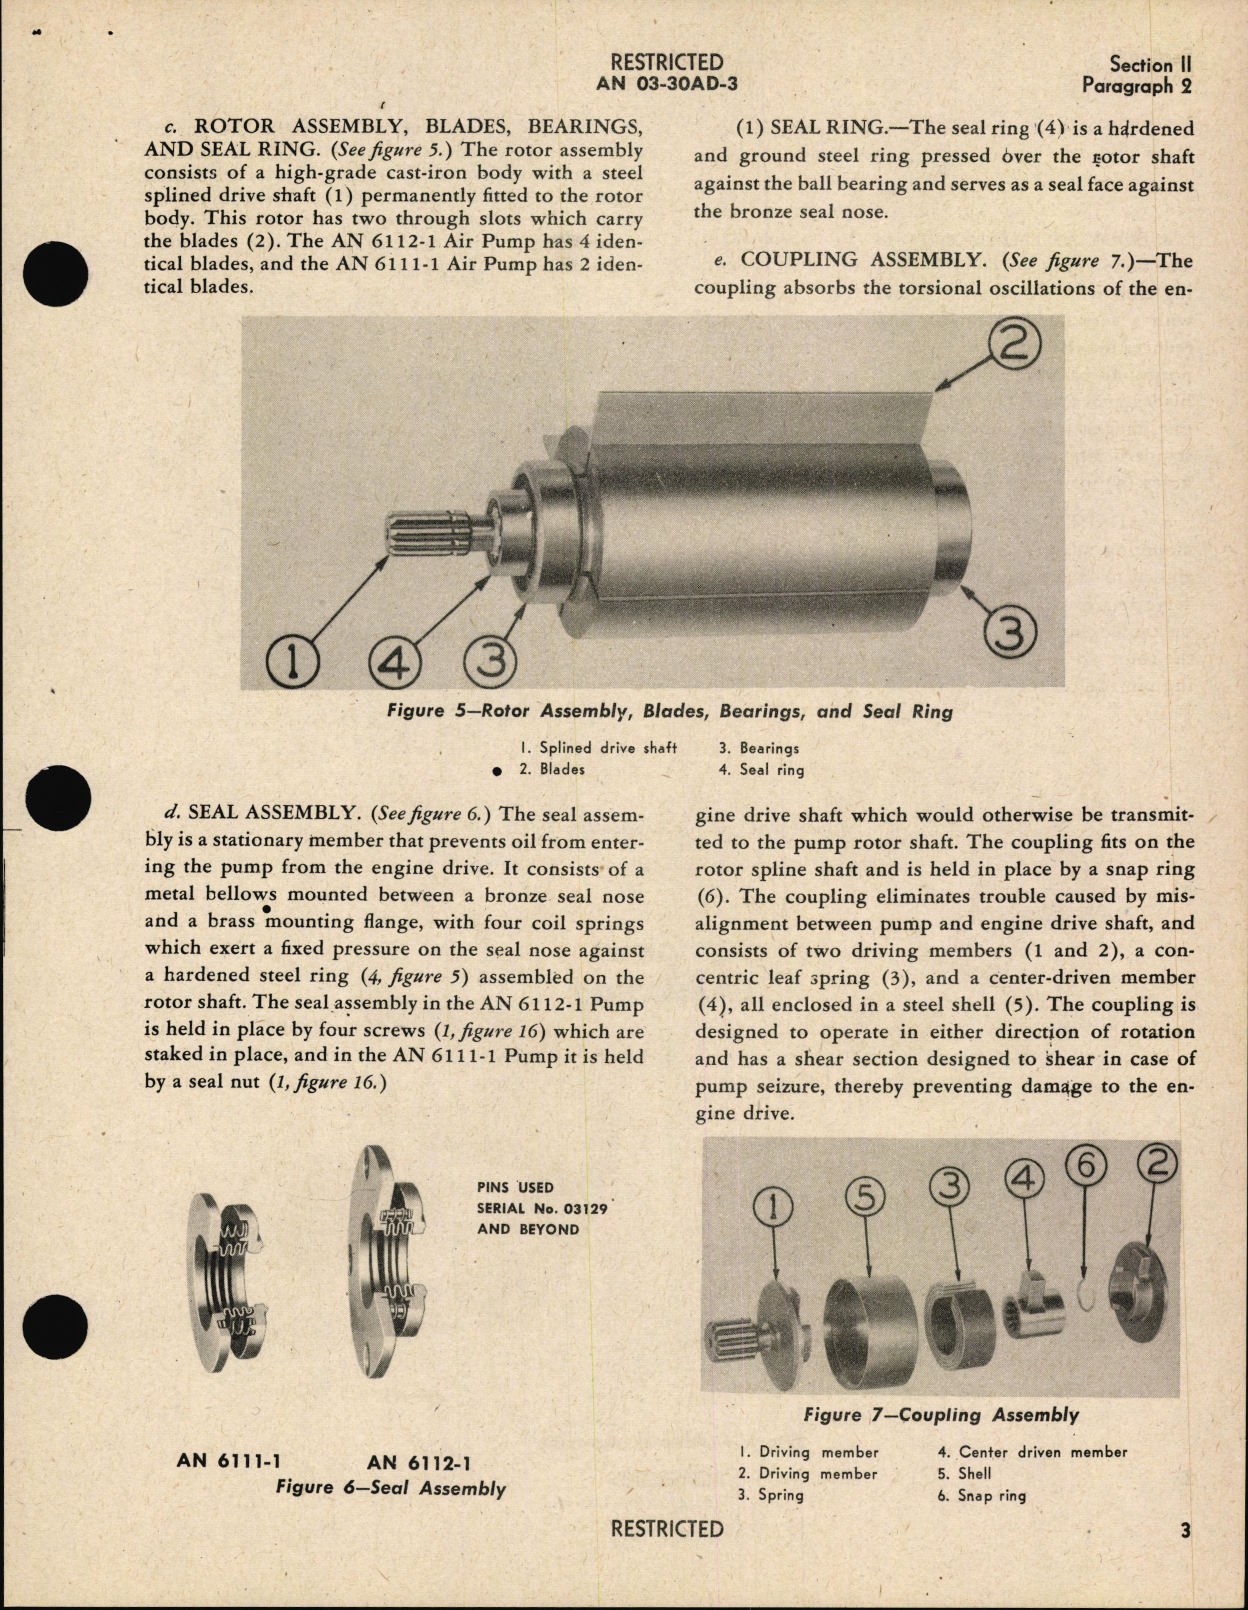 Sample page 7 from AirCorps Library document: Operation, Service and Overhaul Instructions with Parts Catalog for Air Pumps